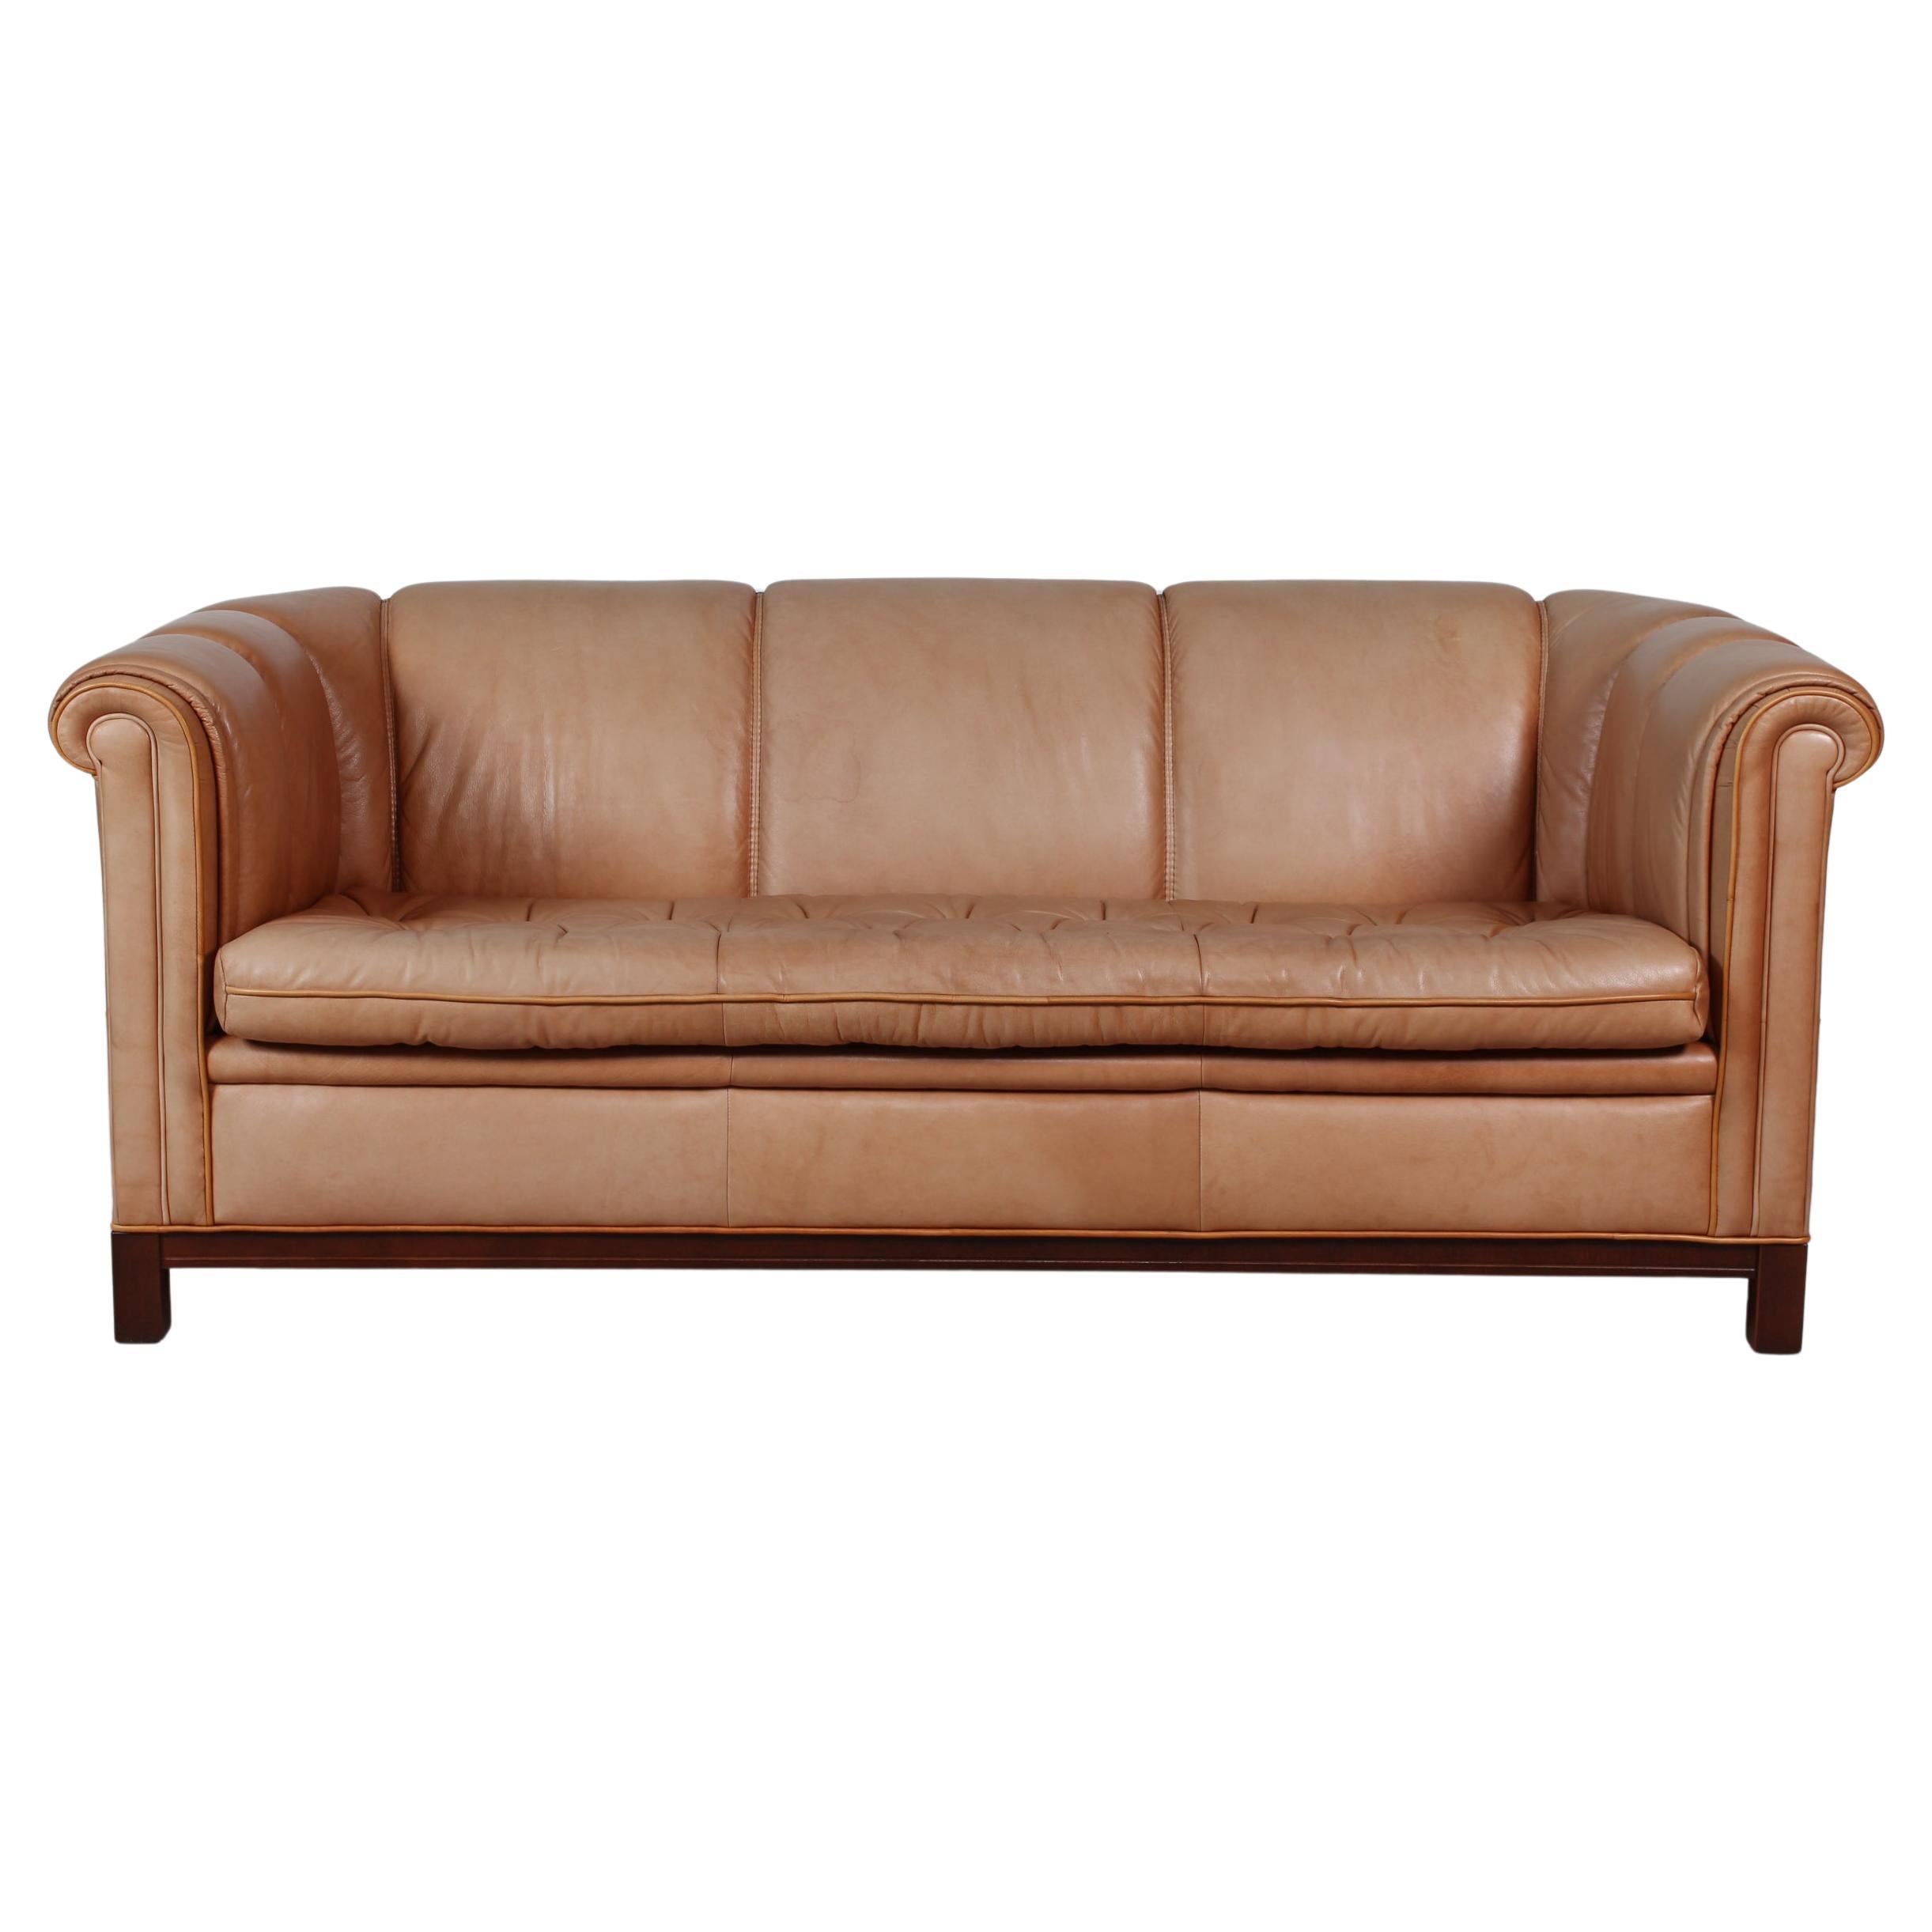 Vintage Chesterfield Sofa and Couch Cognac Leather and Mahogany Frame, 1970s